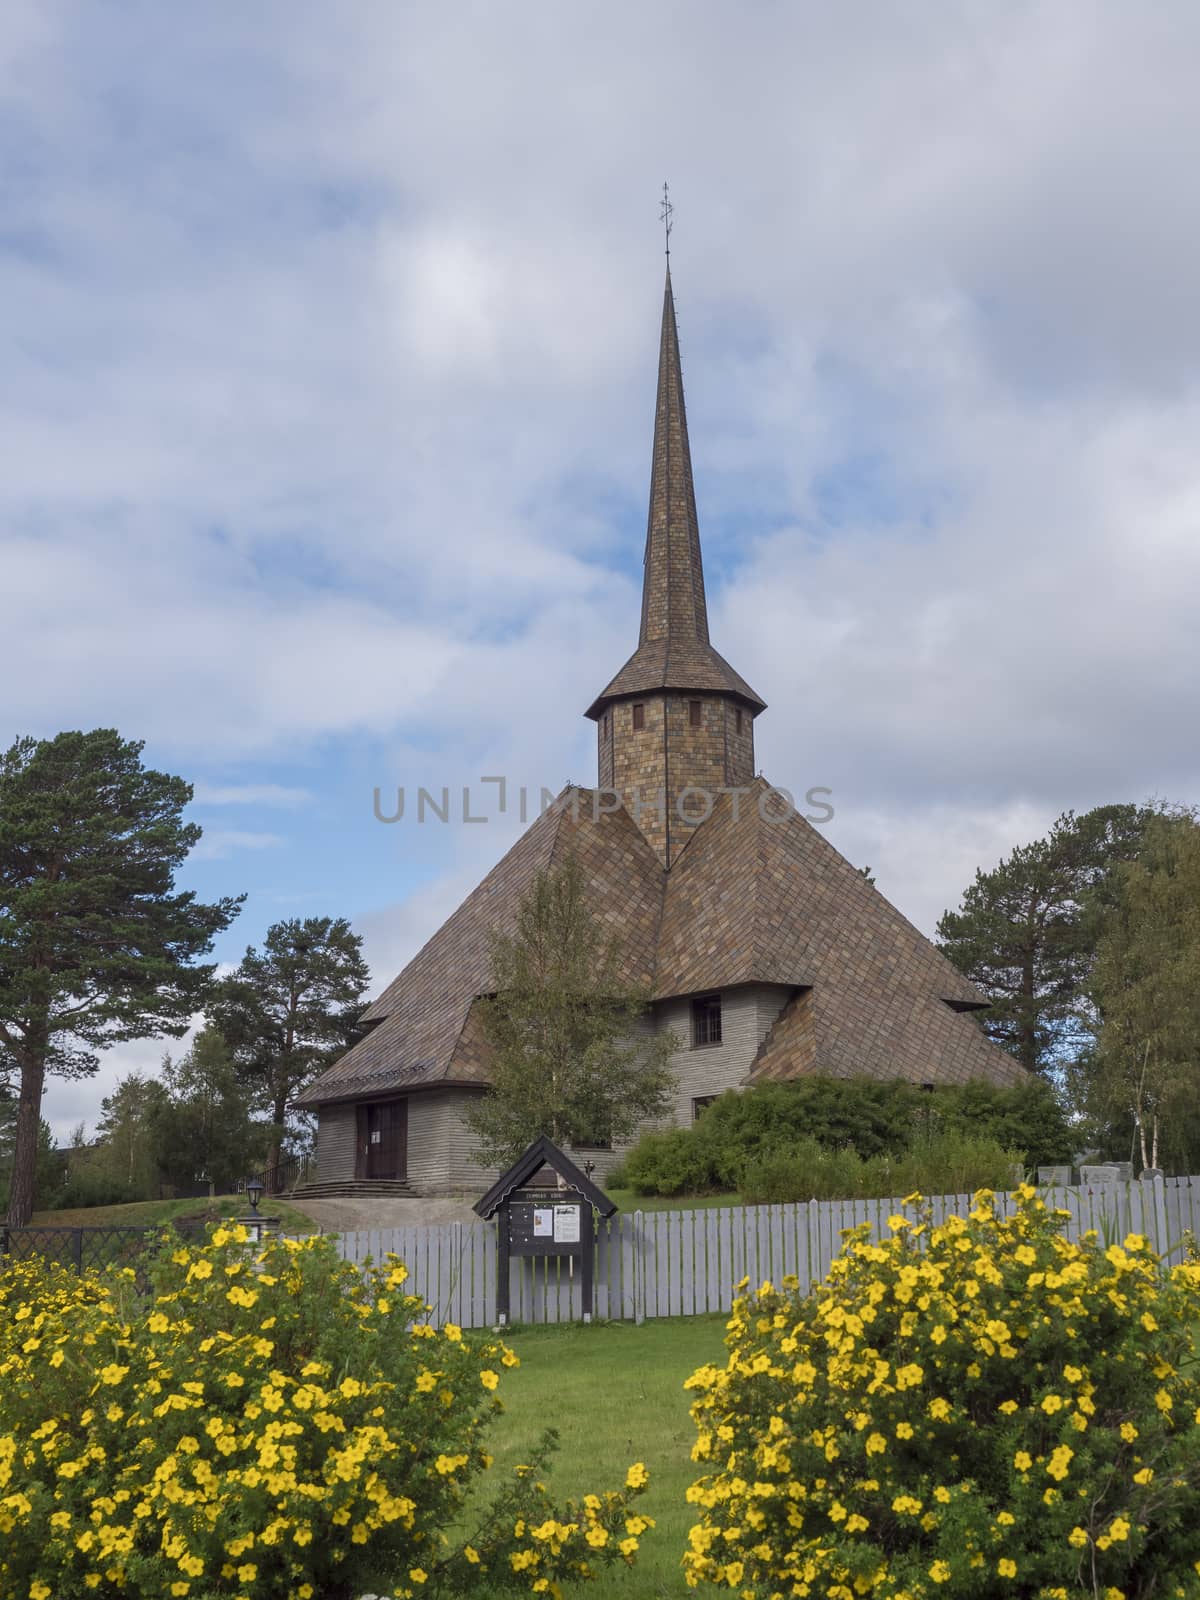 The old church of Dombas in traditional style with blooming yellow flowers. Blue sky, white cloud background. Oppland, Norway.